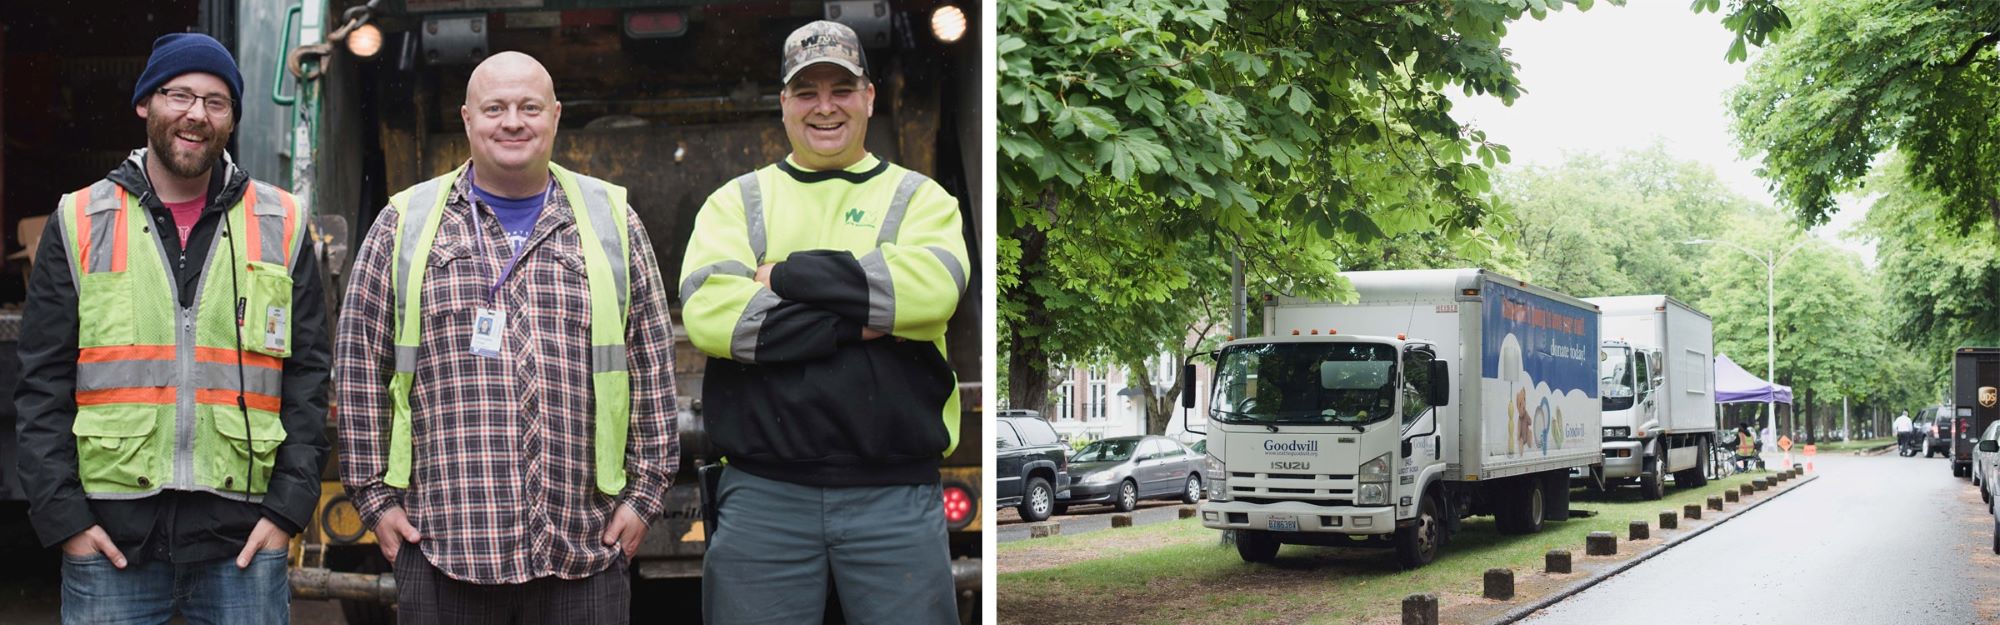 Three staff members pose during HNC on left. On right, trucks parked on median on Greek Row at UW.